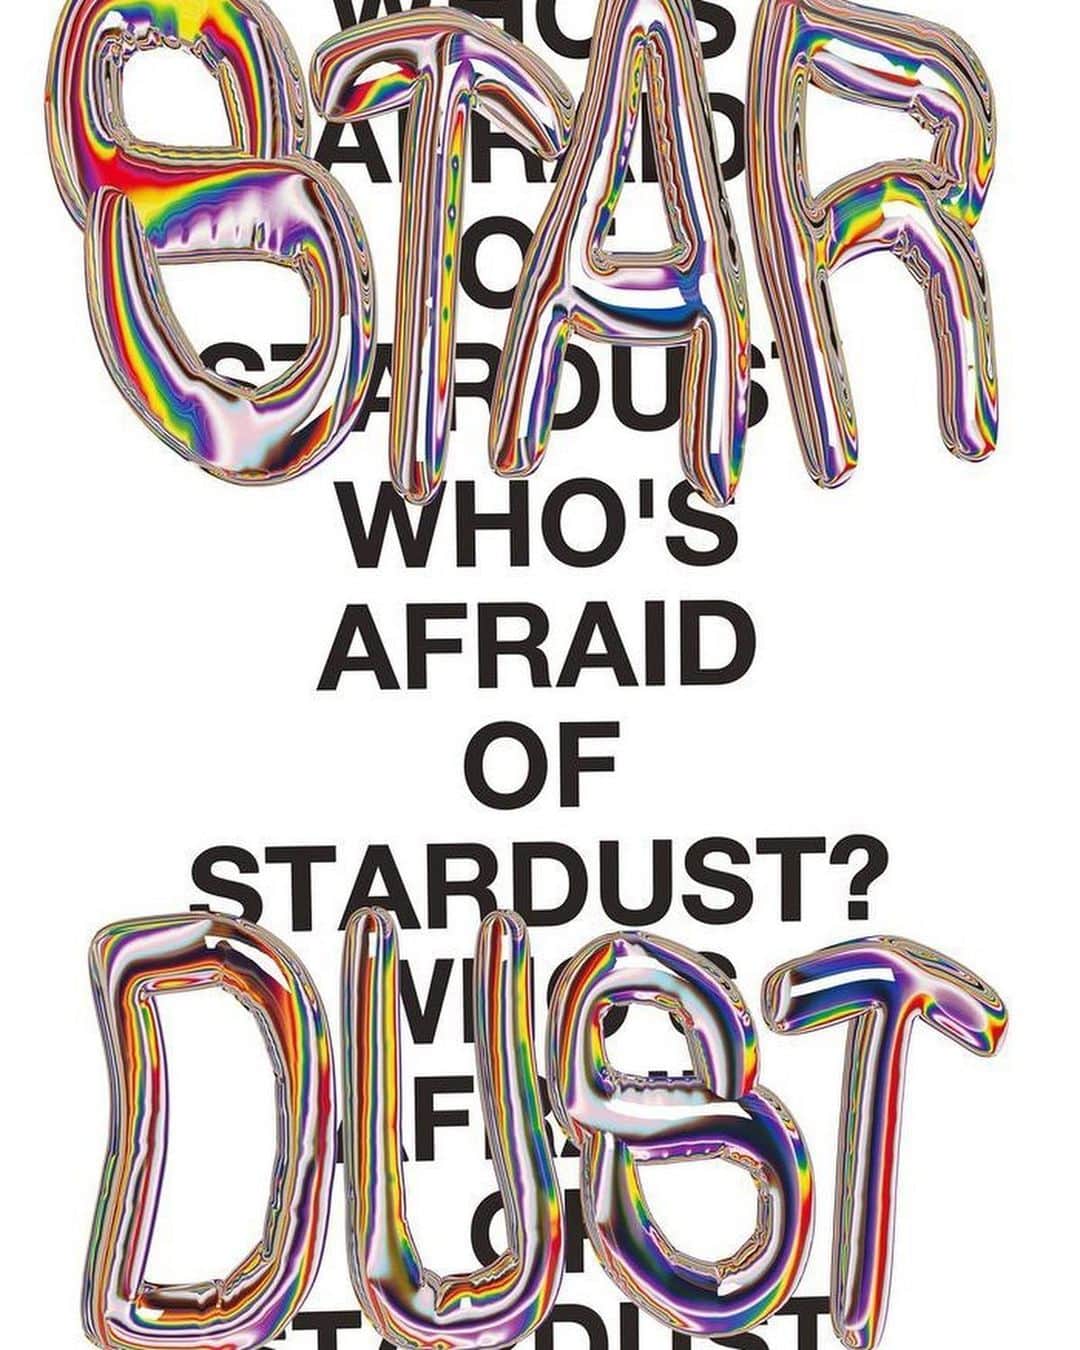 Mrzyk & Moriceauのインスタグラム：「⚡️Group show: WHO’S AFRAID OF STARDUST? Positions of Contemporary Queer Art🌈 Kunsthalle Nürnberg @kunsthallenuernberg  21 Oktober 2023—11 February 2024 With Soufiane Ababri, Leigh Bowery, Katherine Bradford, Julia Bünnagel, Han Diernberger & Will Saunders, Jochen Flinzer, Félix Gonzàlez Torres, Harry Hachmeister and many more🌈🌈🌈 #mrzykmoriceau」